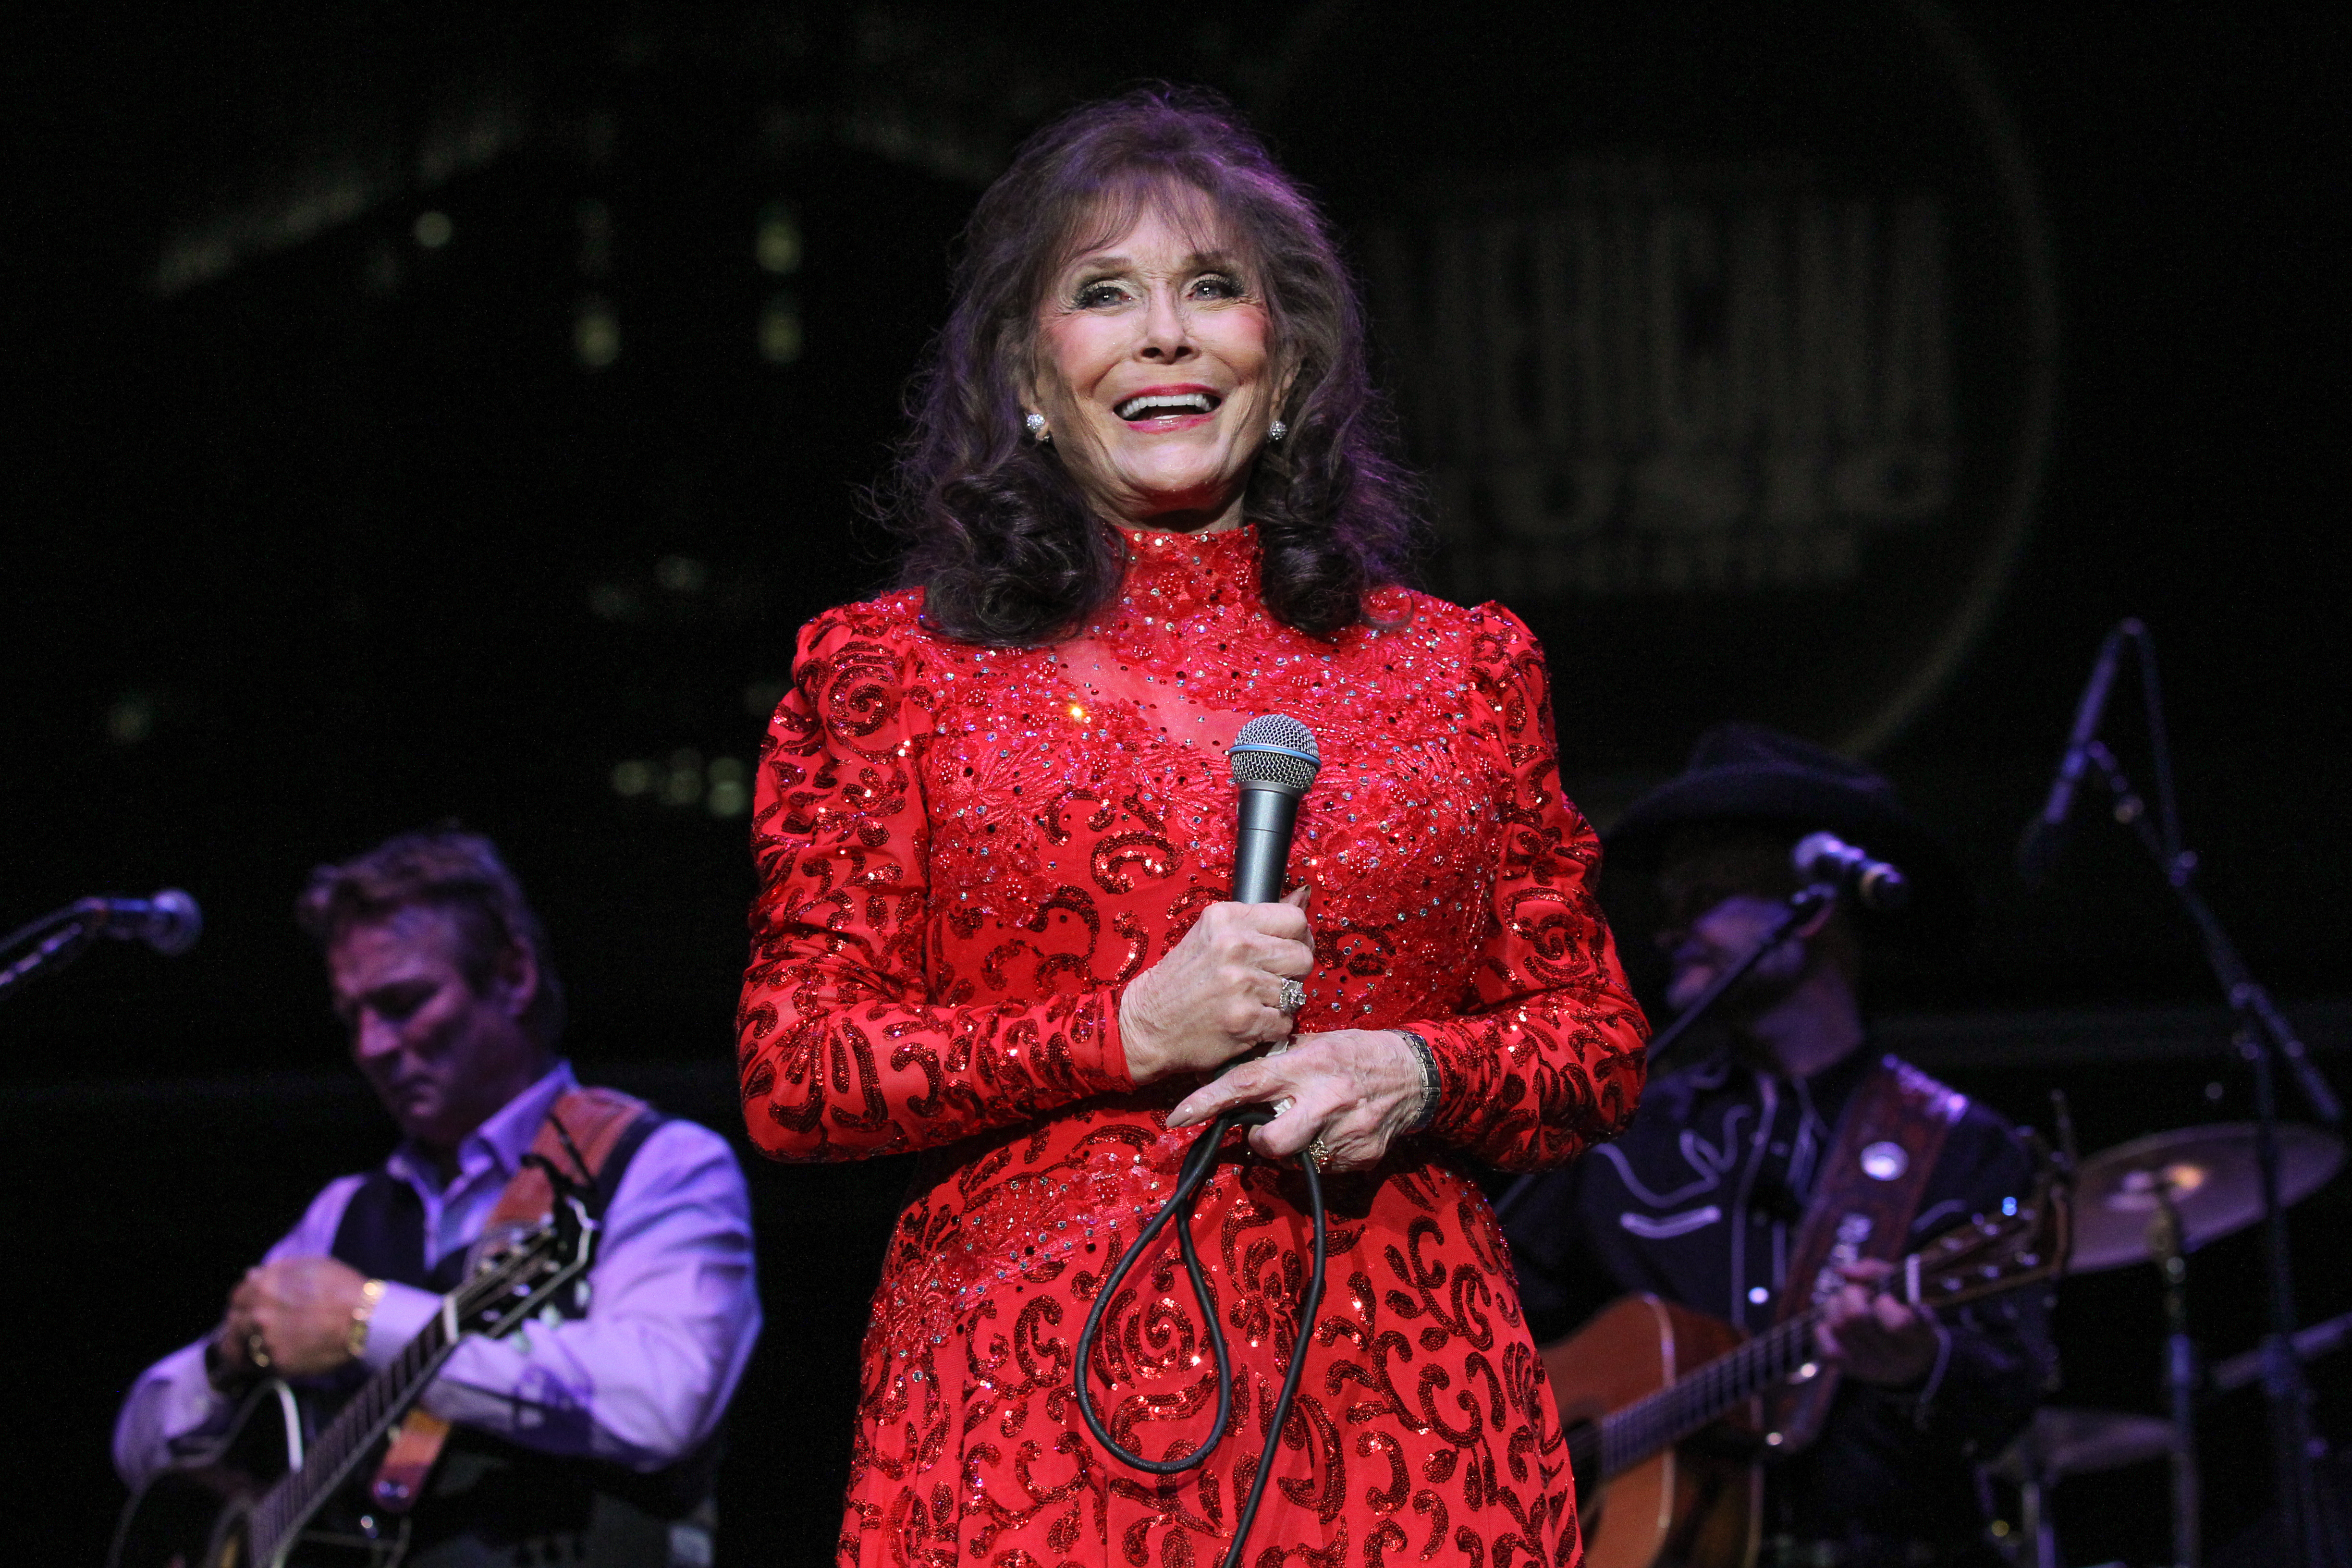 Loretta Lynn performs during the 16th Annual Americana Music Festival & Conference at Ascend Amphitheater in Nashville, Tennessee, on September 19, 2015. | Source: Getty Images